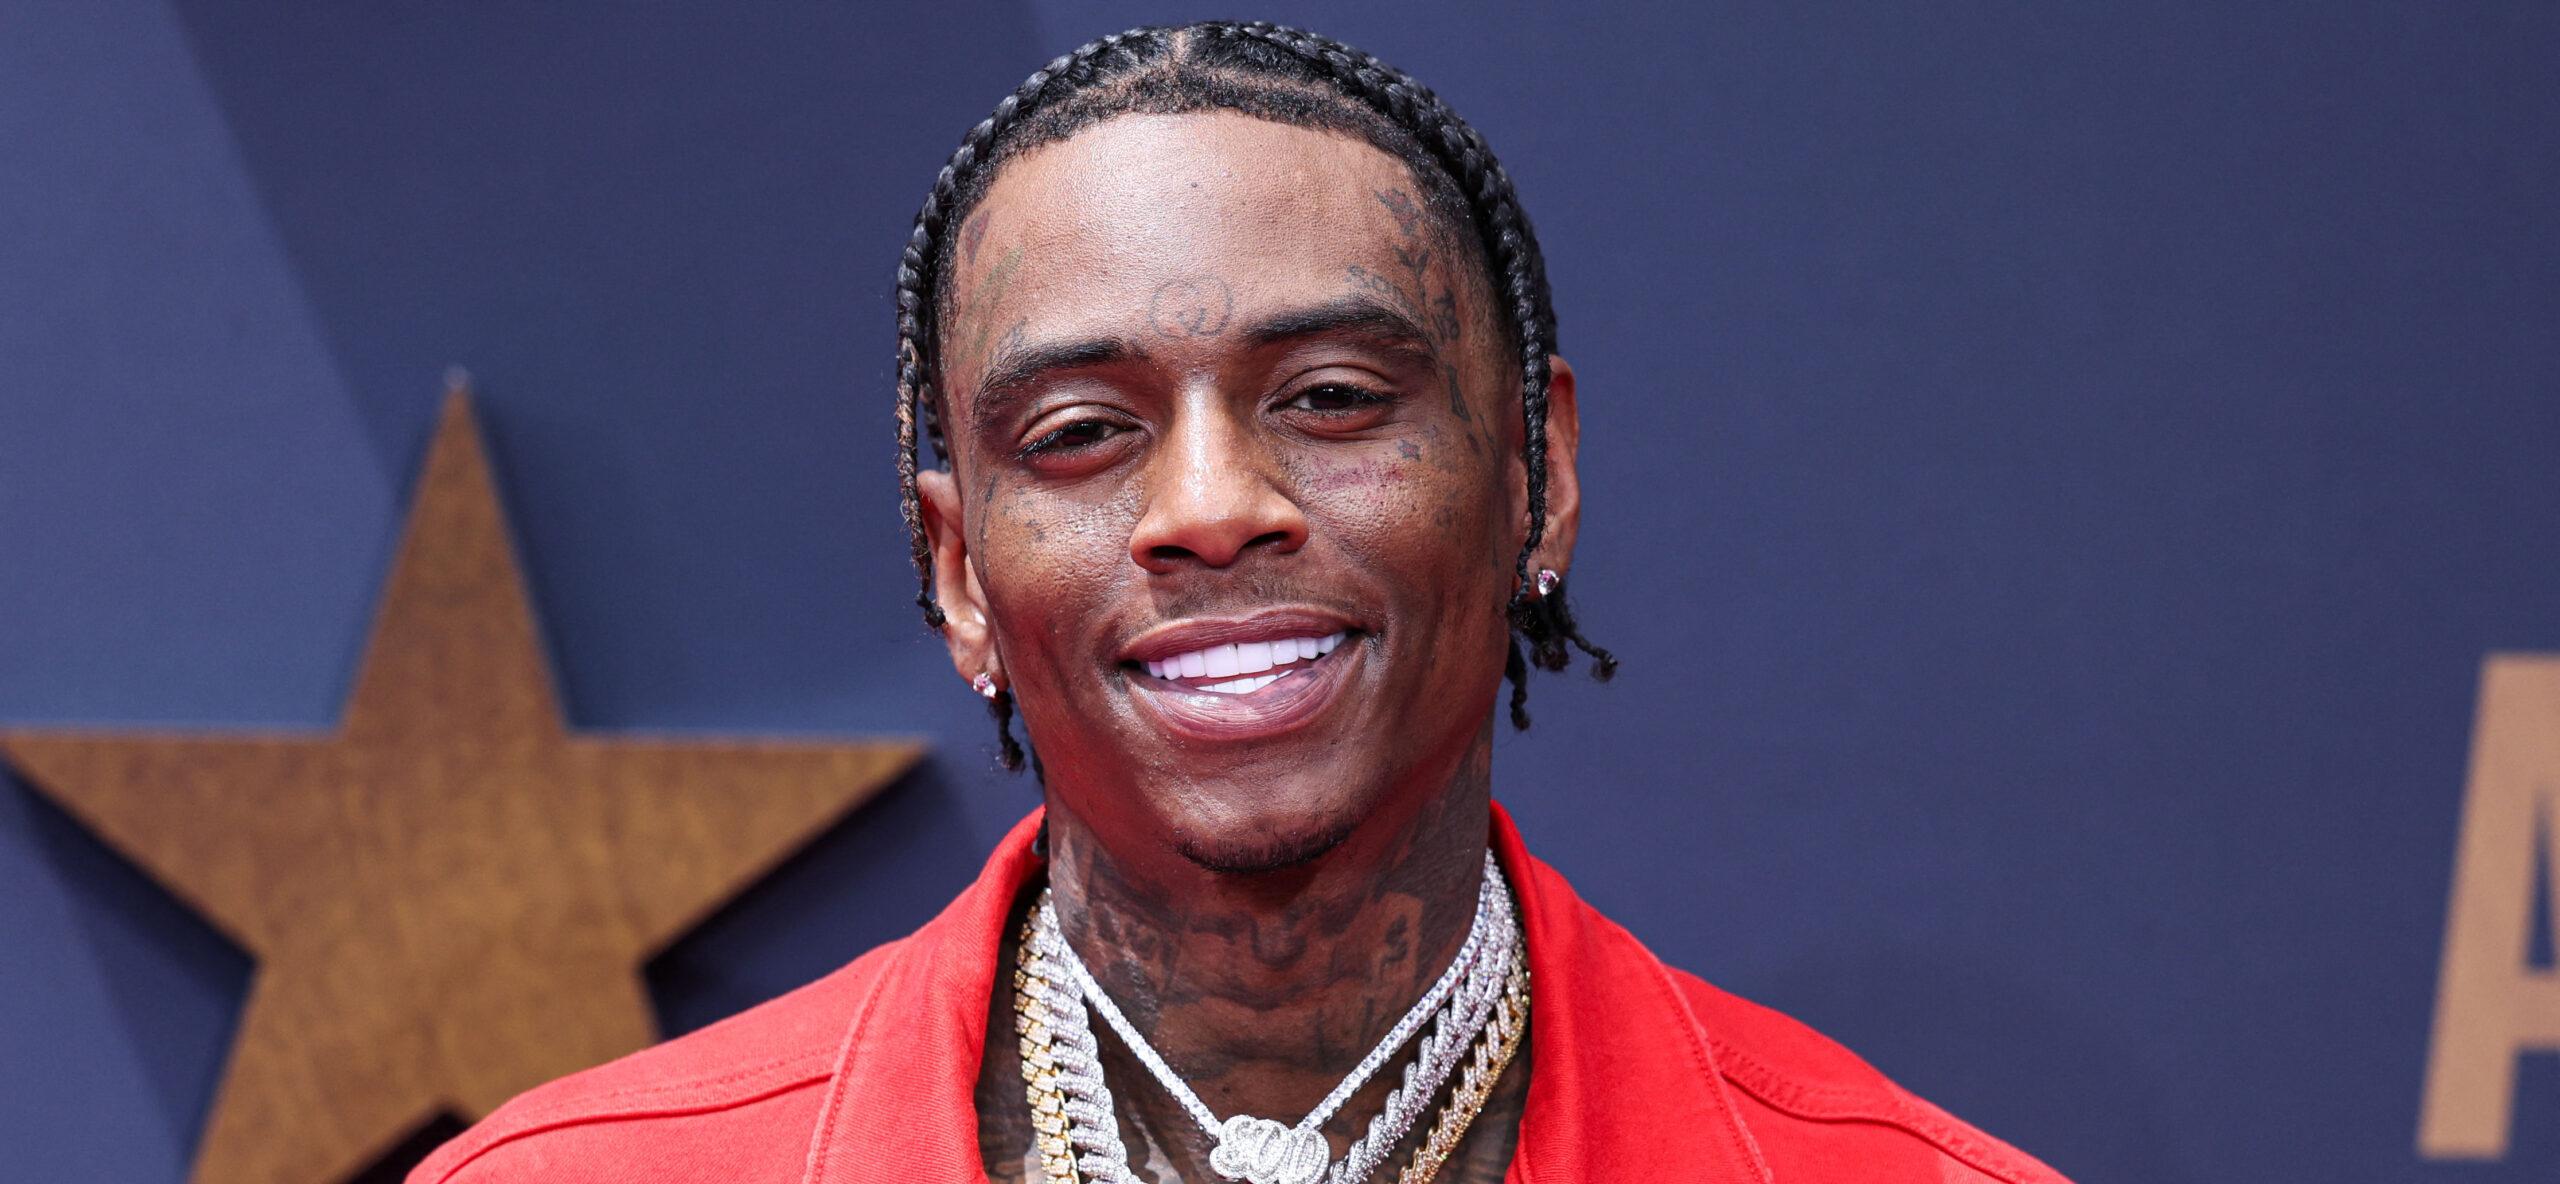 Soulja Boy Faces $10M In Damages Amid Alleged S-xual Battery